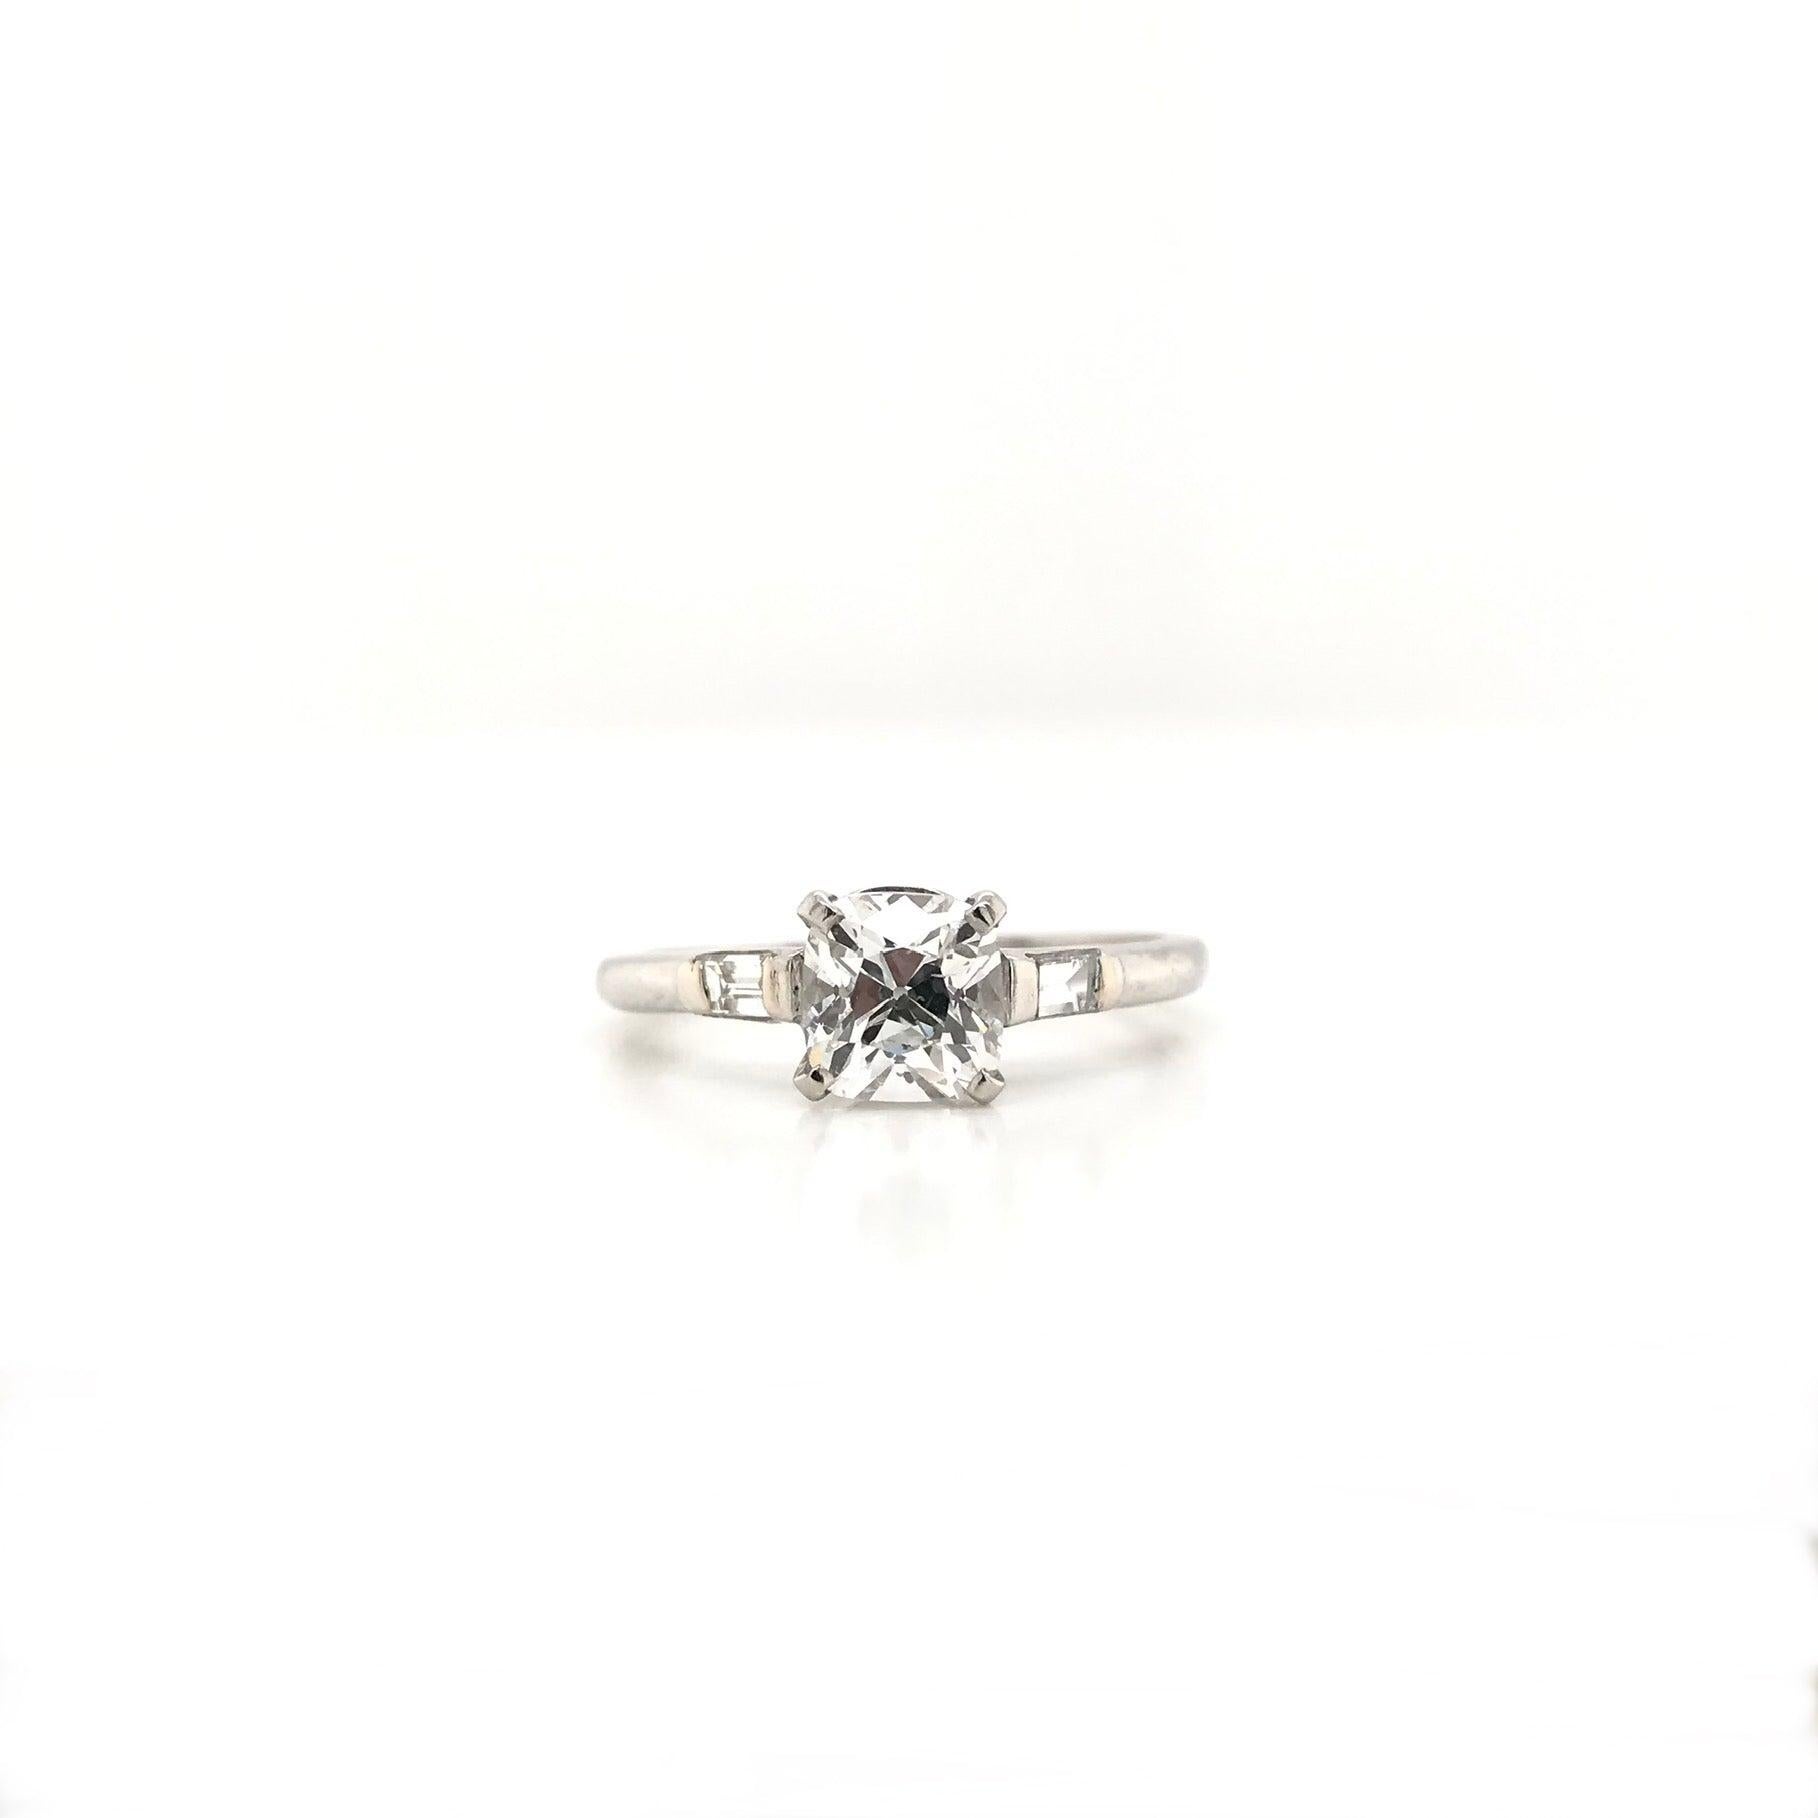 This beautiful antique piece was handcrafted sometime during the Art Deco design period (1920-1940). The platinum setting is a classically simple solitaire style with two baguette cut diamond accents. The center diamond is an Old Mine cut measuring